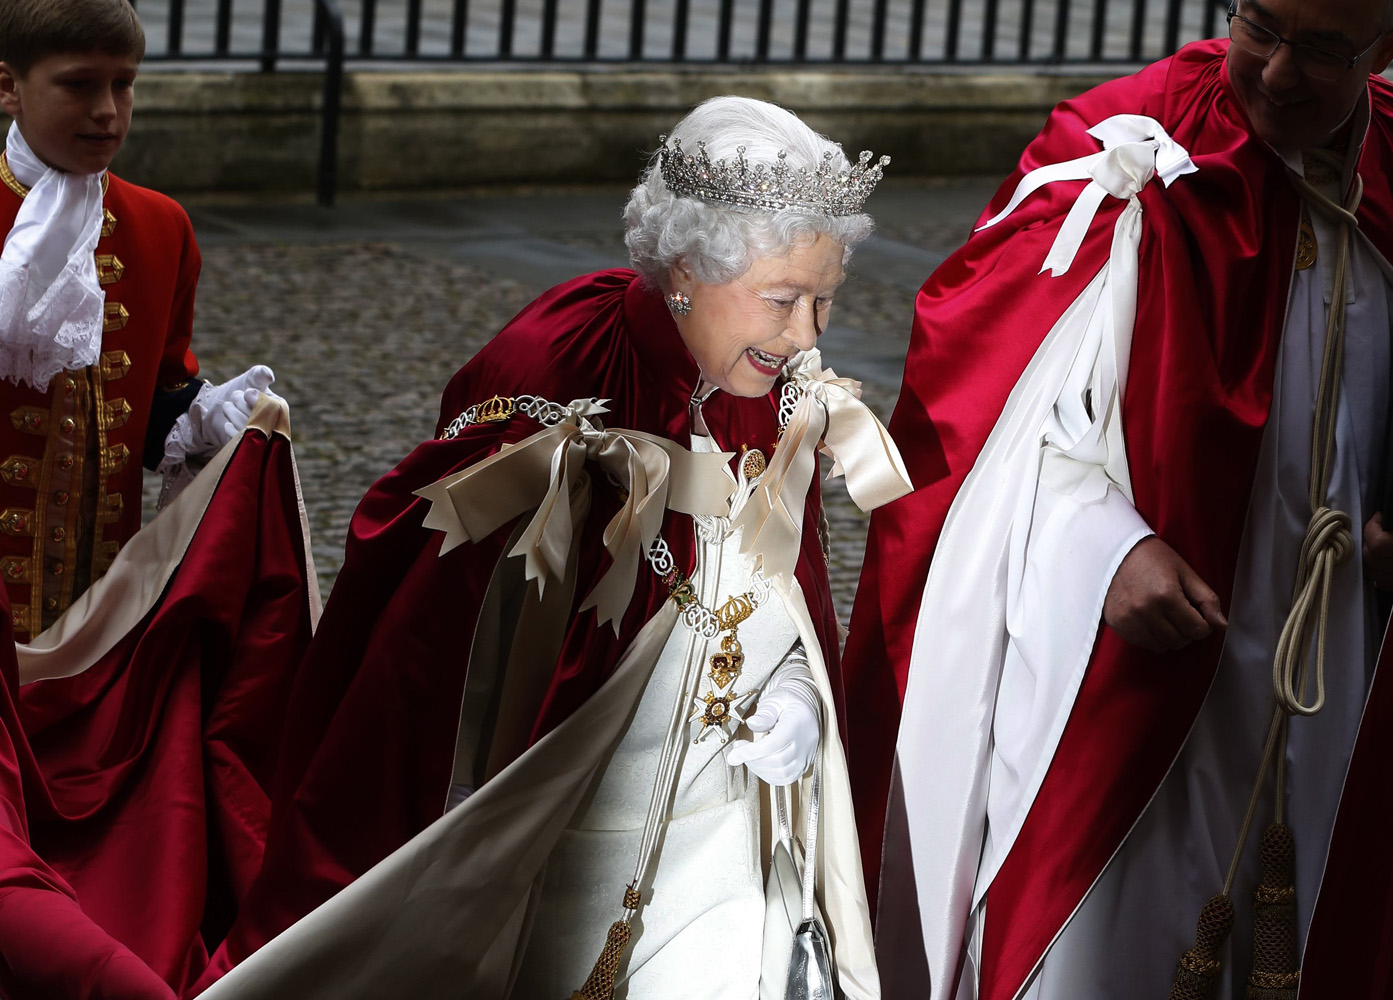 Britain's Queen Elizabeth arrives for a Service of the Order of the Bath at Westminster Abbey in London